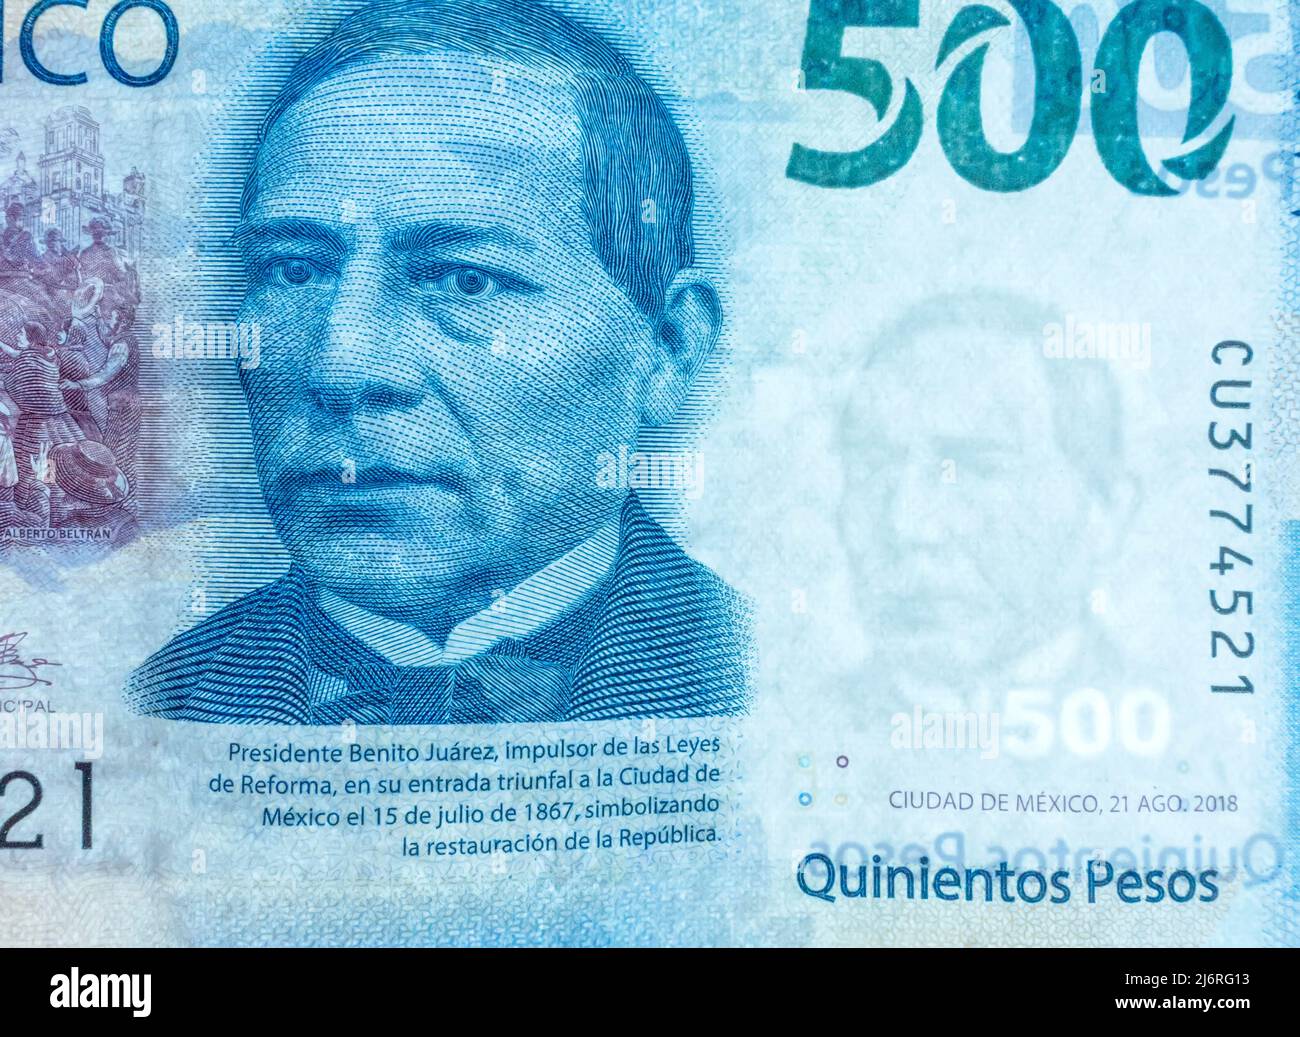 Watermark on Mexico 500 peso currency bill featuring first president Benito Juarez Stock Photo